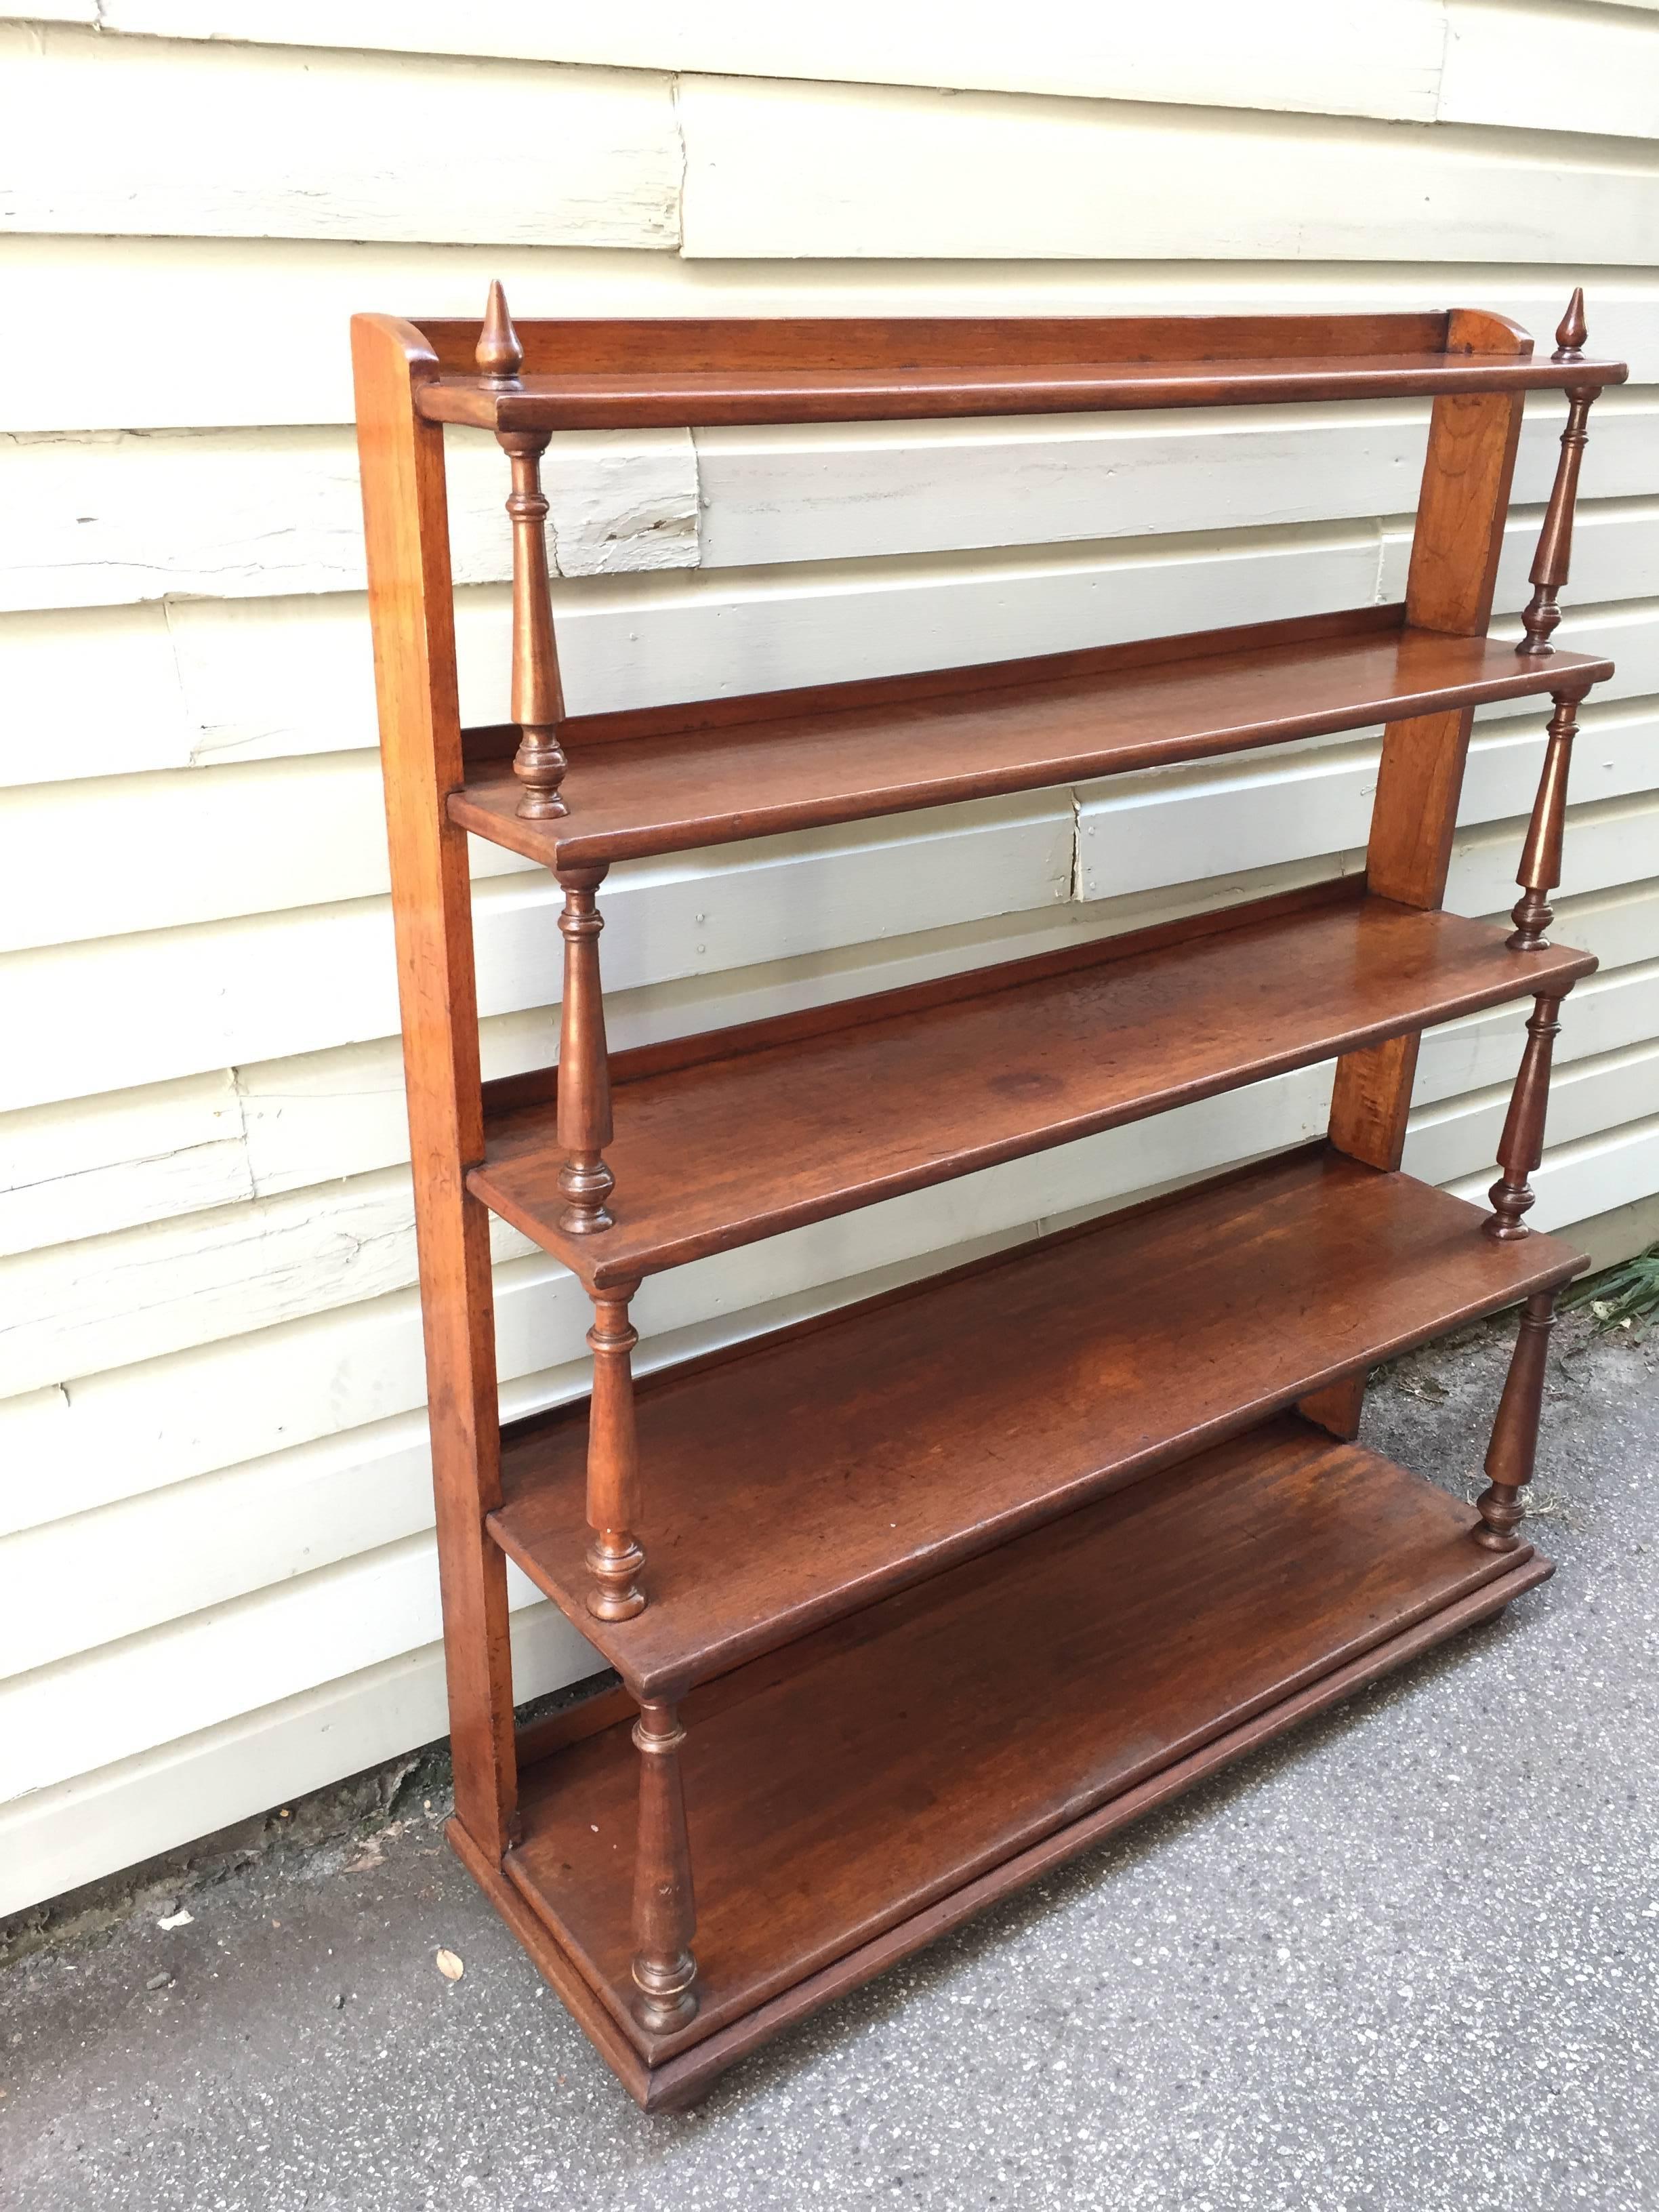 A circa 1820 bookcase from Barbados that reflects the West Indies/British Colonial style made from solid cedrela, featuring five shelves and pointed finials on top. This bookcase is published in a book documenting Caribbean antiques title 